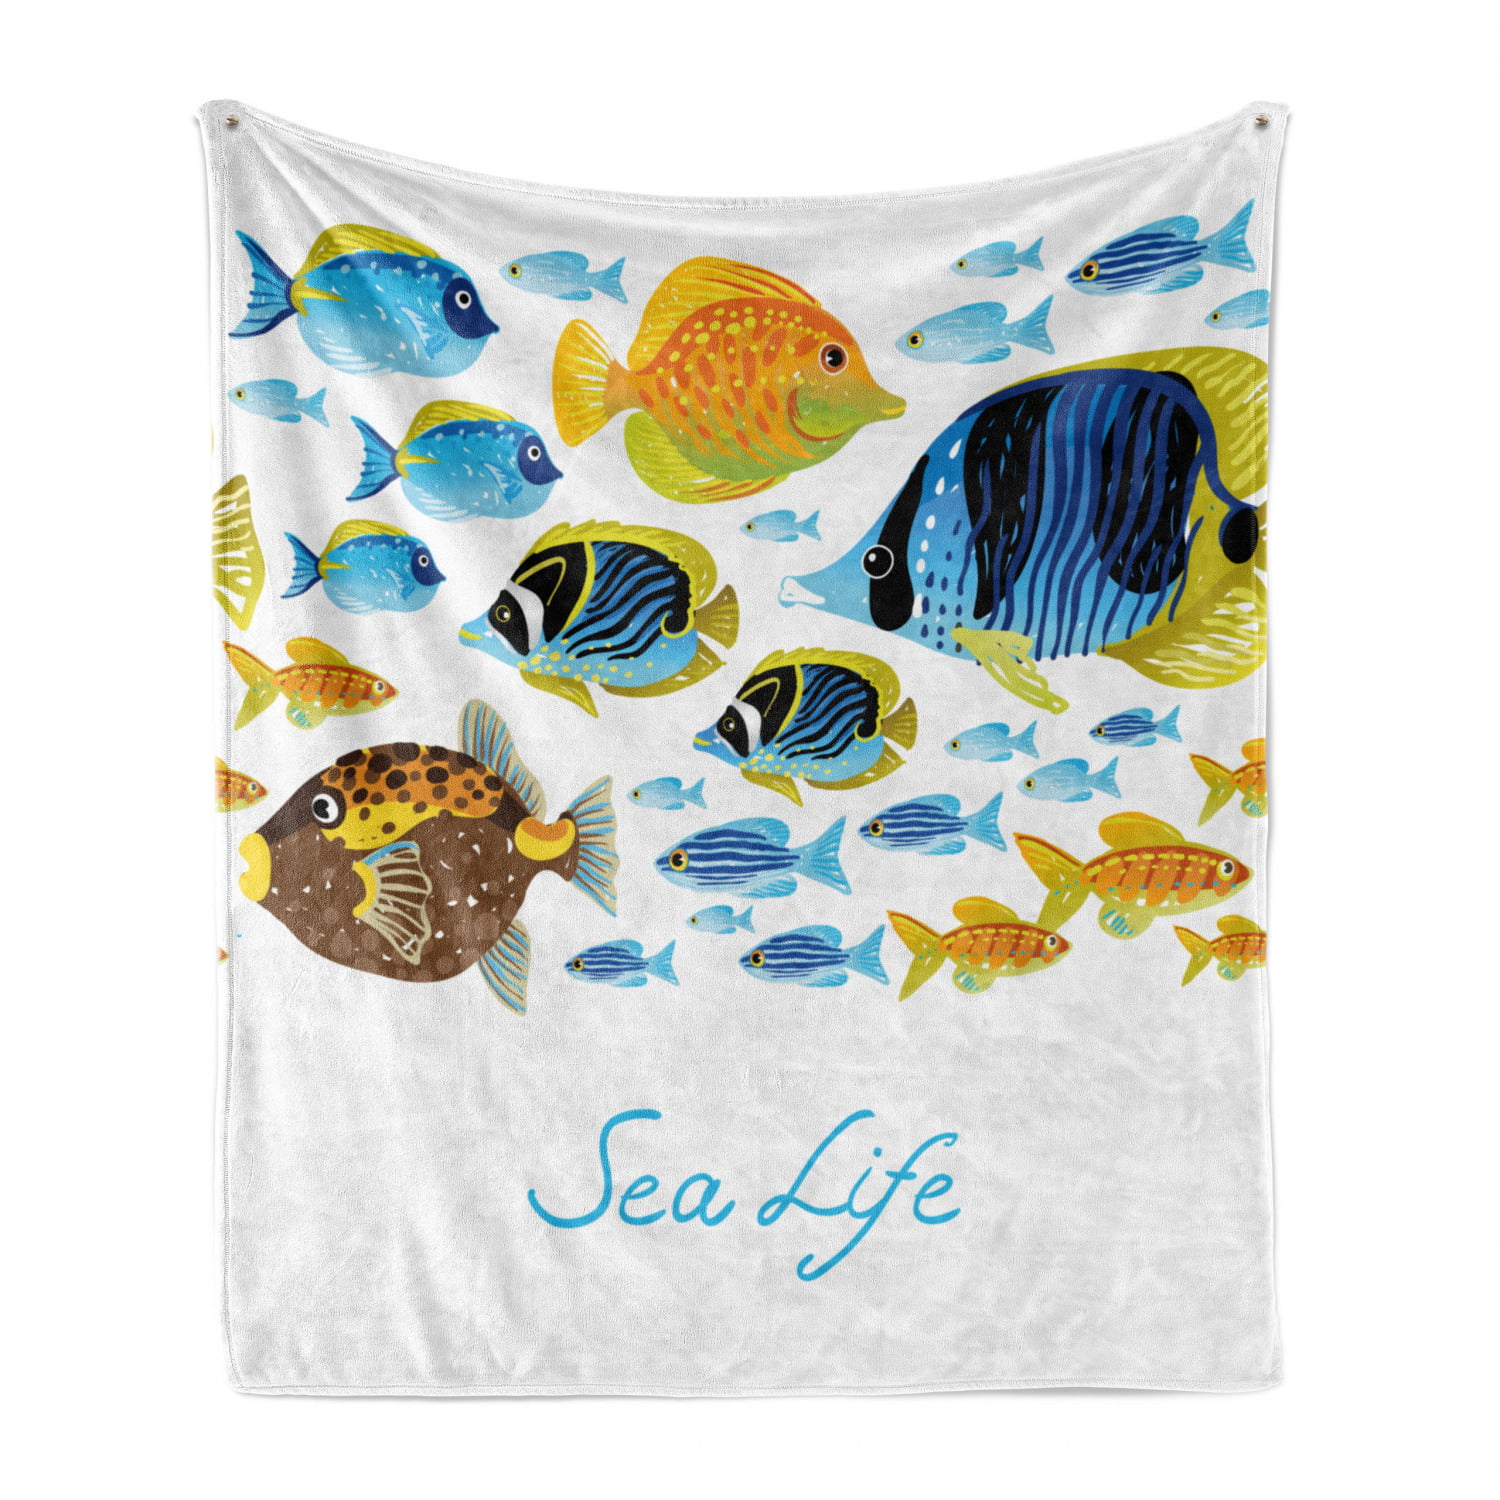 Cozy Plush for Indoor and Outdoor Use Multicolor Print of Colorful Marine Themed Lifestyle with Many Fish Species in The Ocean 70 x 90 Ambesonne Underwater Soft Flannel Fleece Throw Blanket 